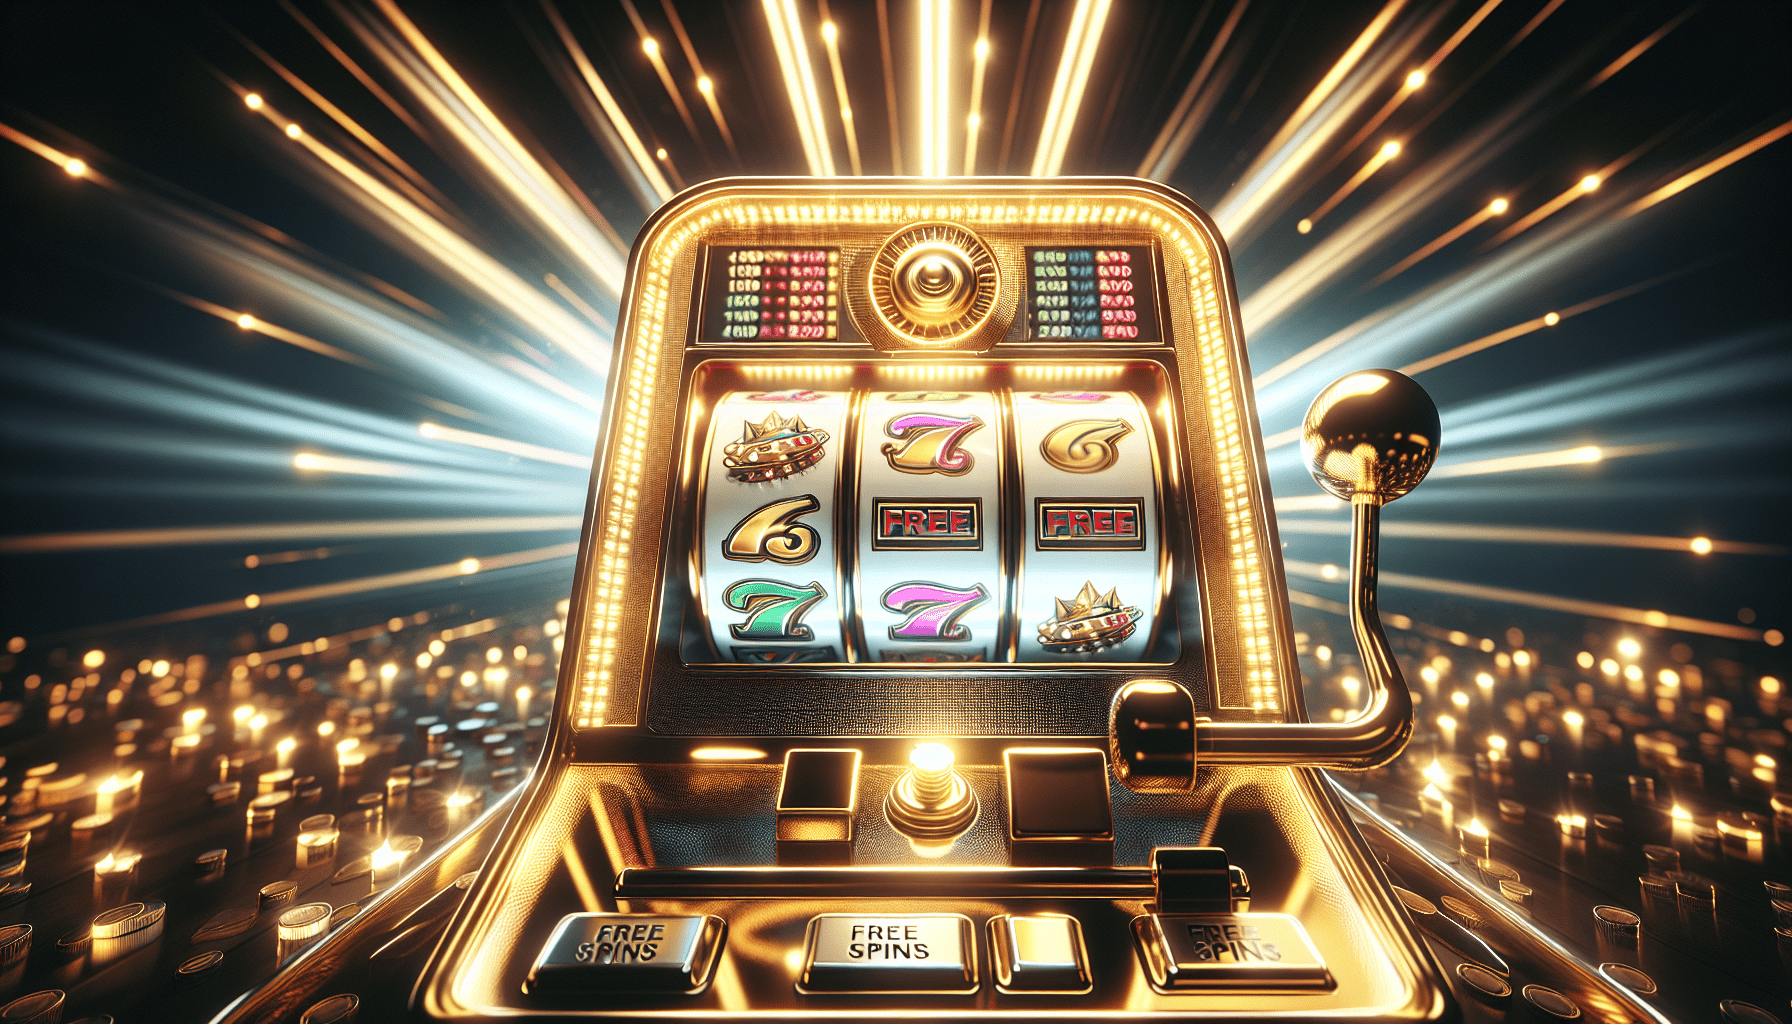 Can You Win With Free Play On A Slot Machine?